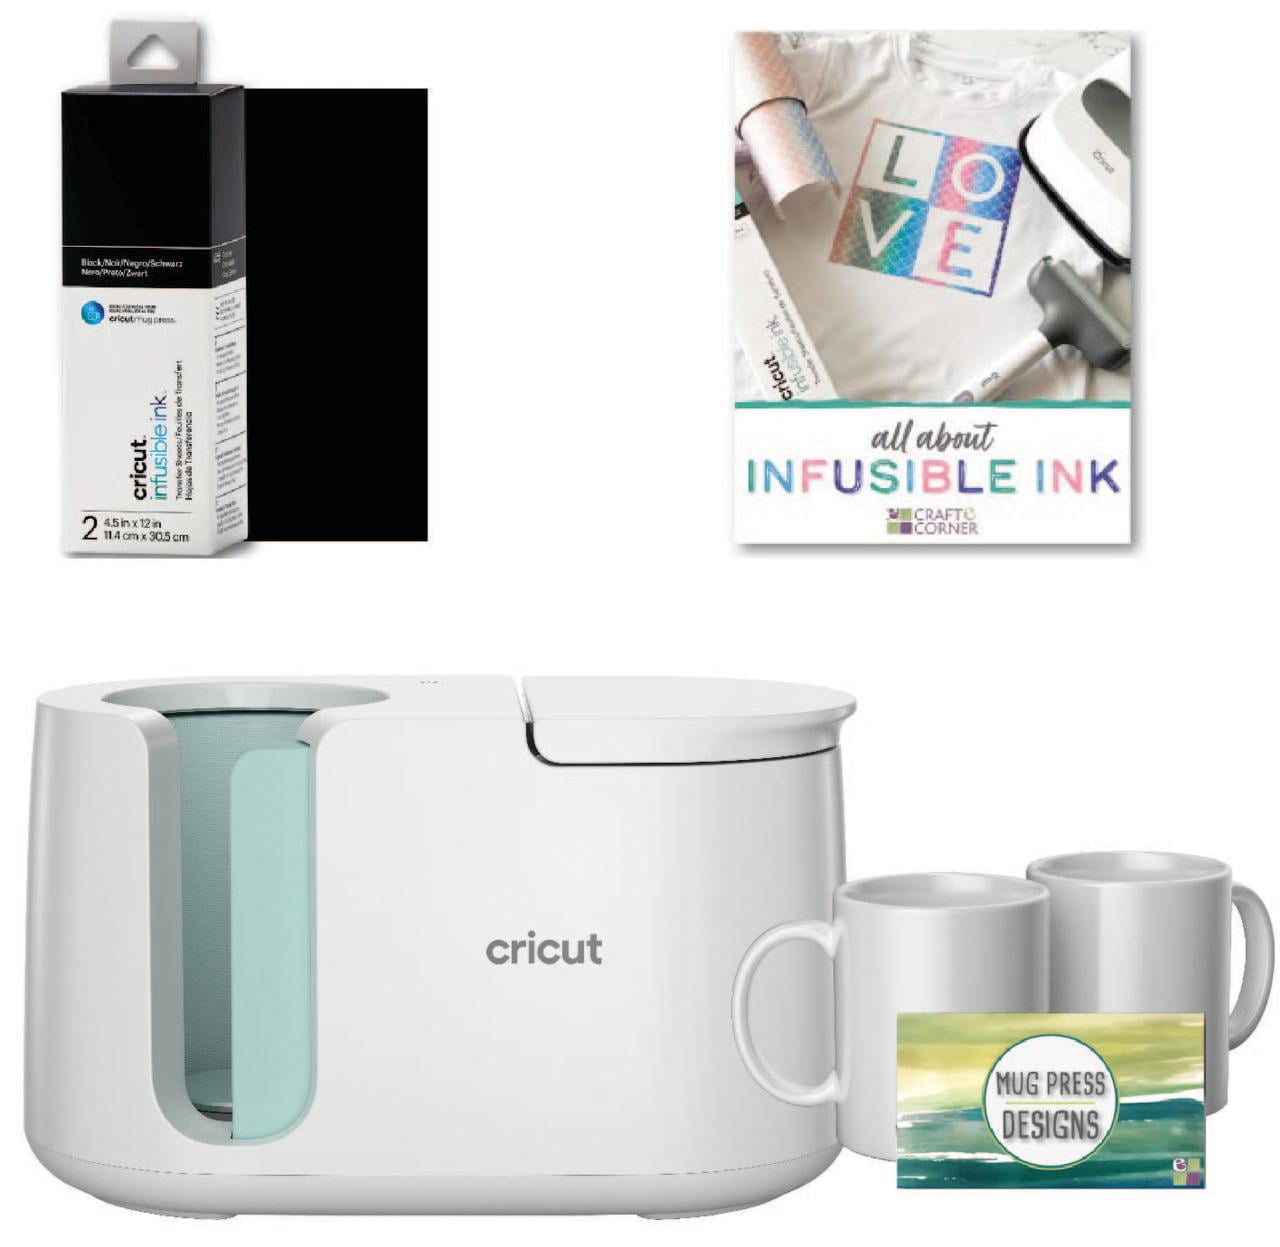 Cricut Hat Press and Infusible Ink Patterns Bundle